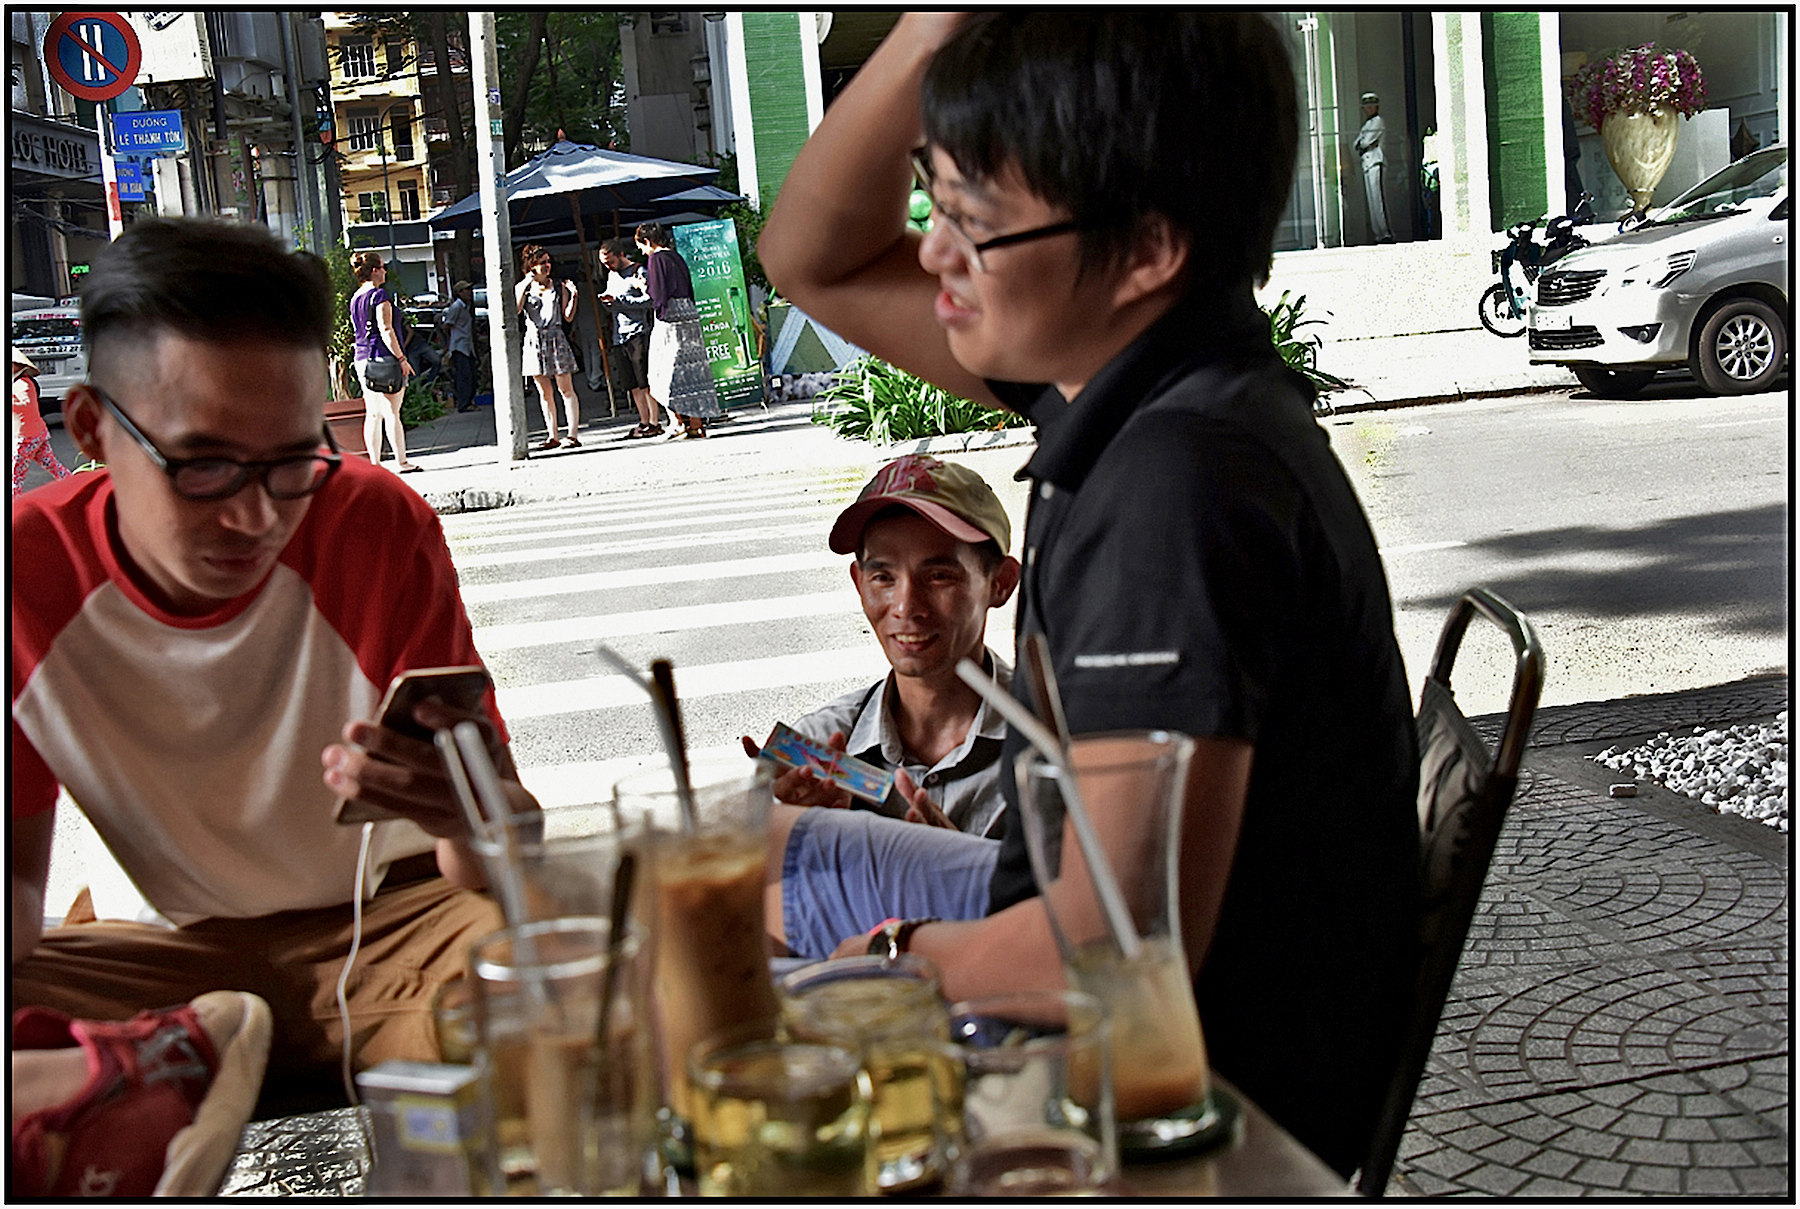  Four teenage boys at a Coffee Cafe as a legless man attempts to sell lottery tickets. Saigon/HCMC, Jan. 2016. #0155 